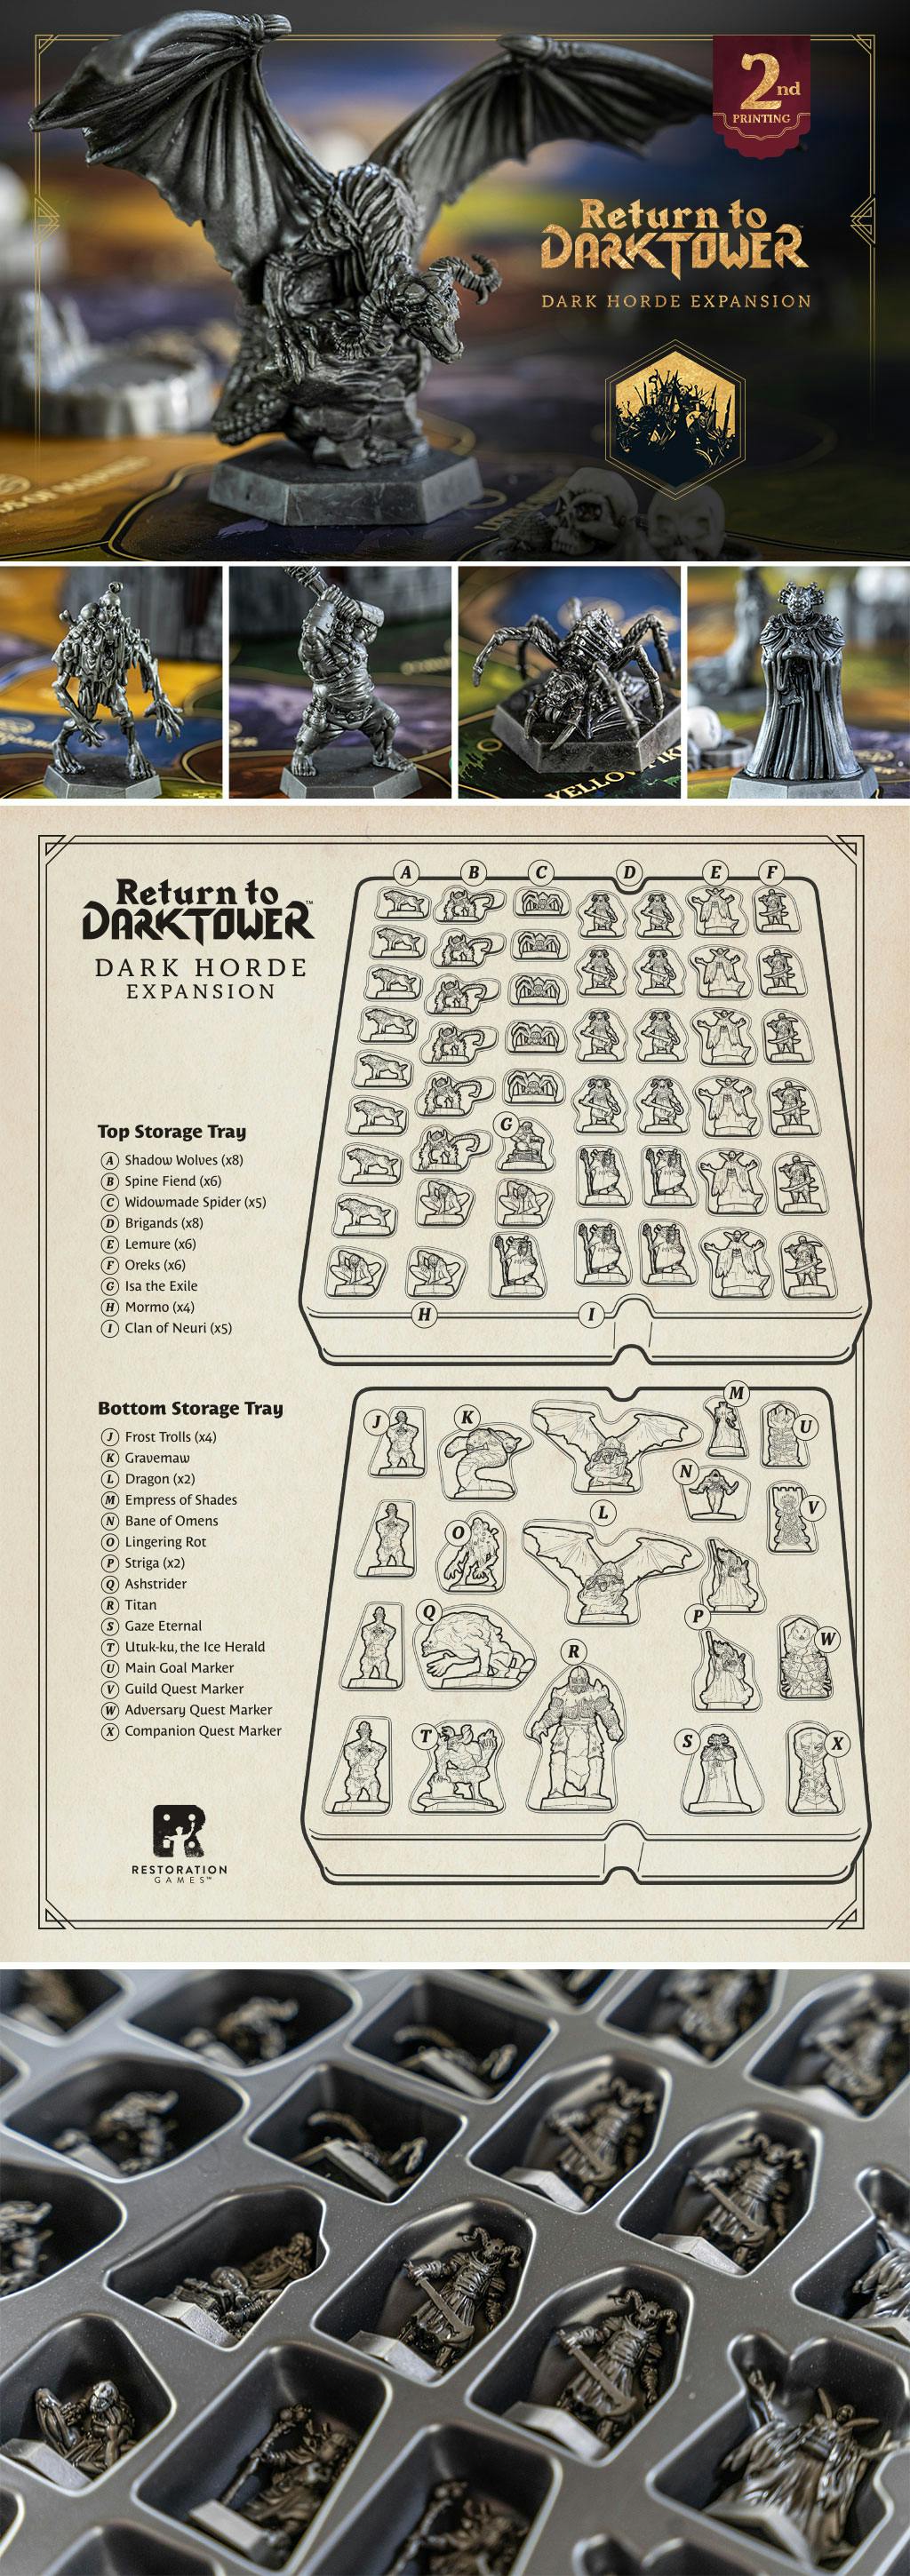 Dark Horde image collage including the components list and close up on various miniatures